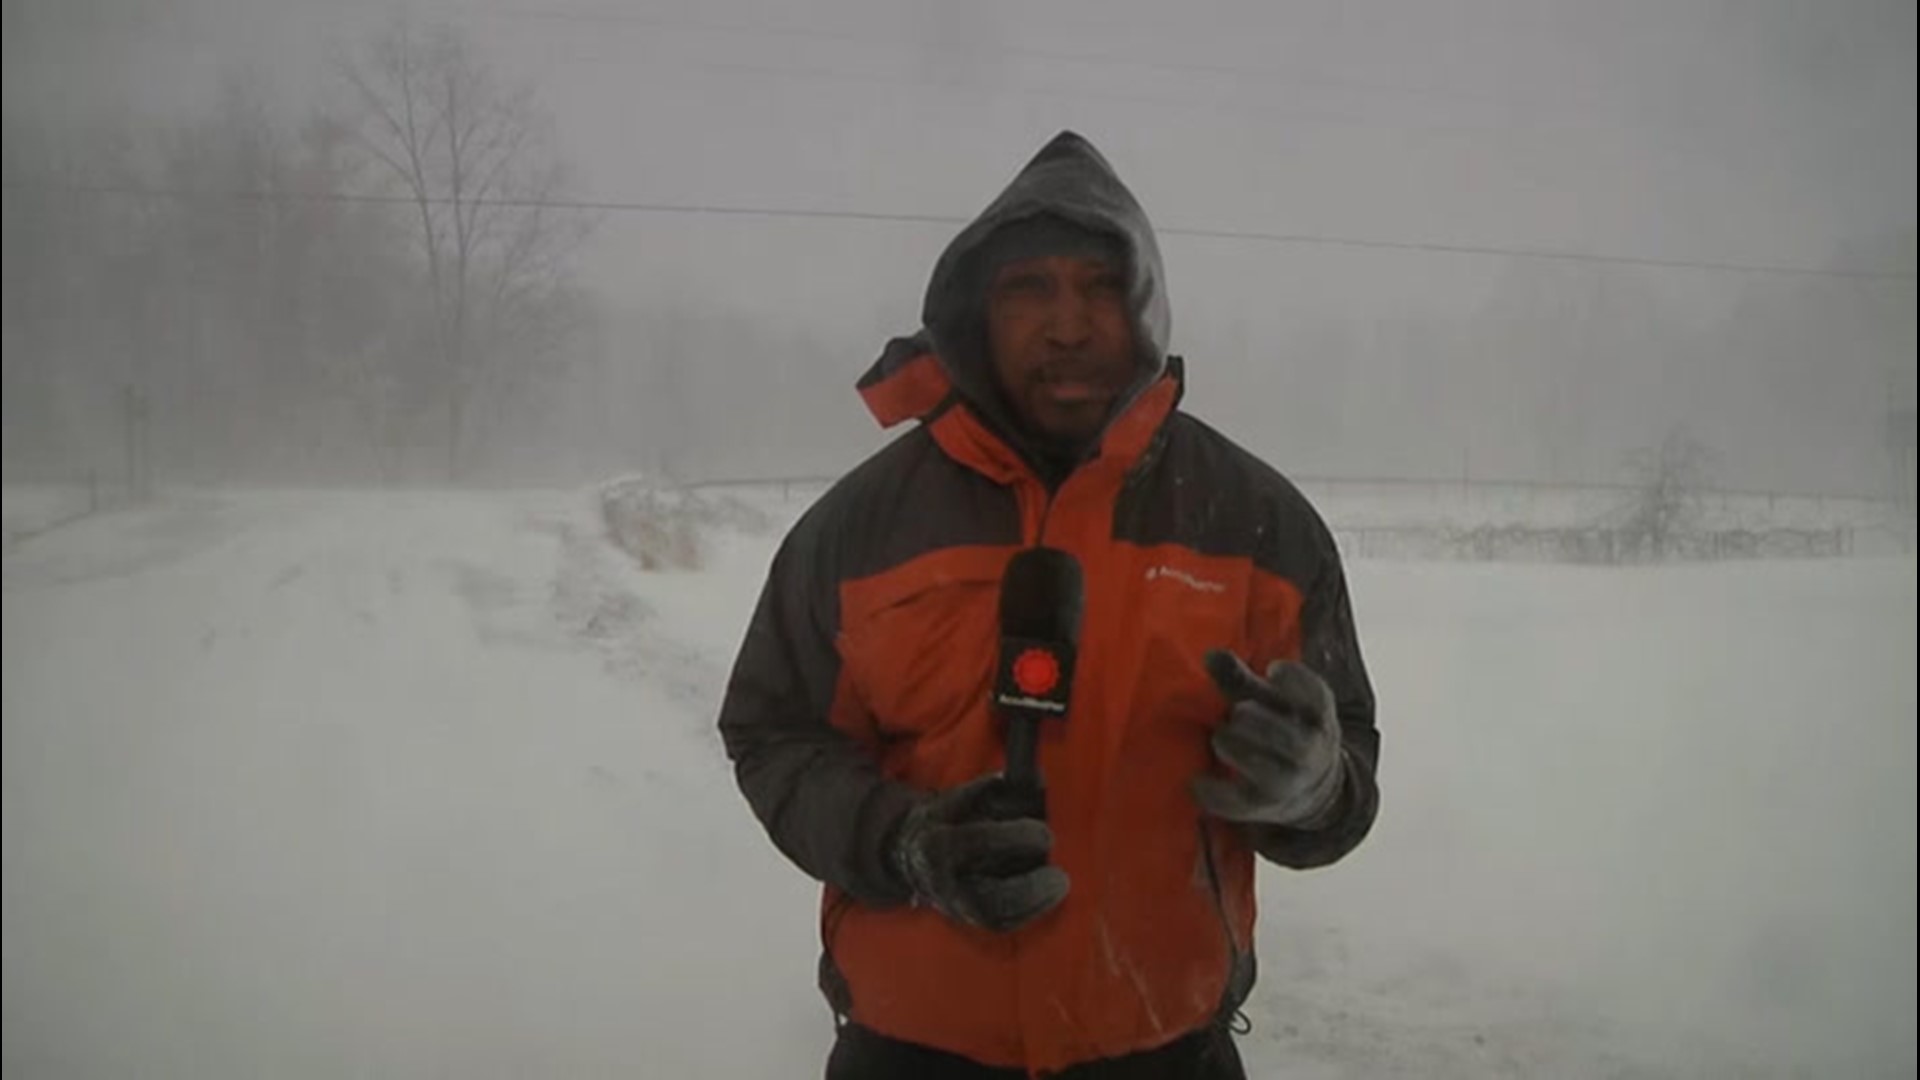 AccuWeather's Dexter Henry was in Mannsville, New York, on Feb. 27 to get a first-hand look at the dangerous snow and wind hitting the Northeast.